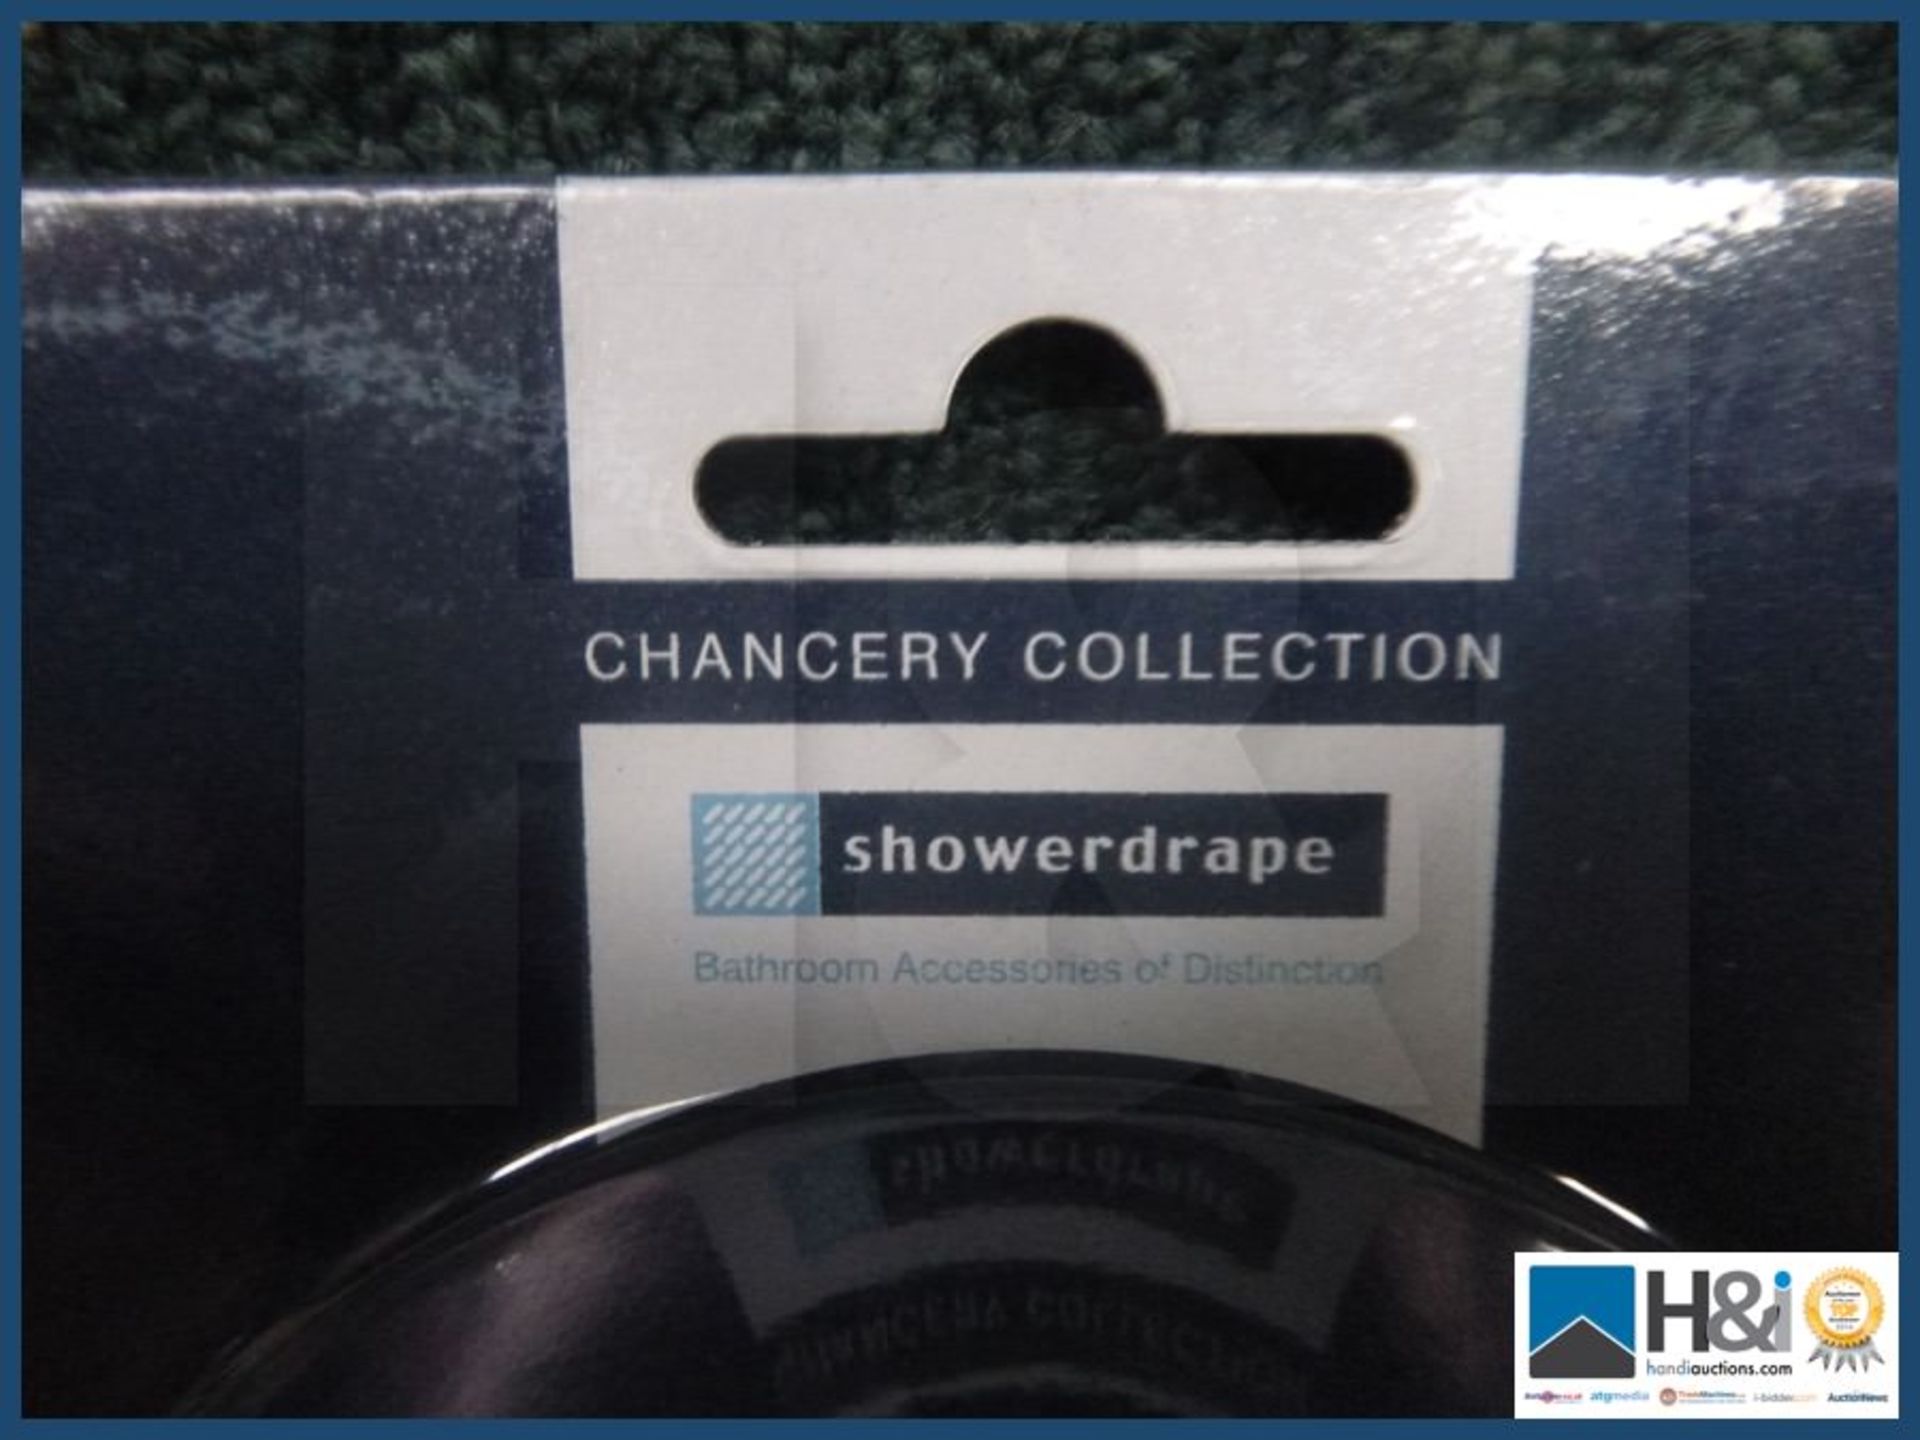 Showerdrape Chancery collection soap dish Chrome and glass finish RRP 20 GBP. - Image 2 of 5